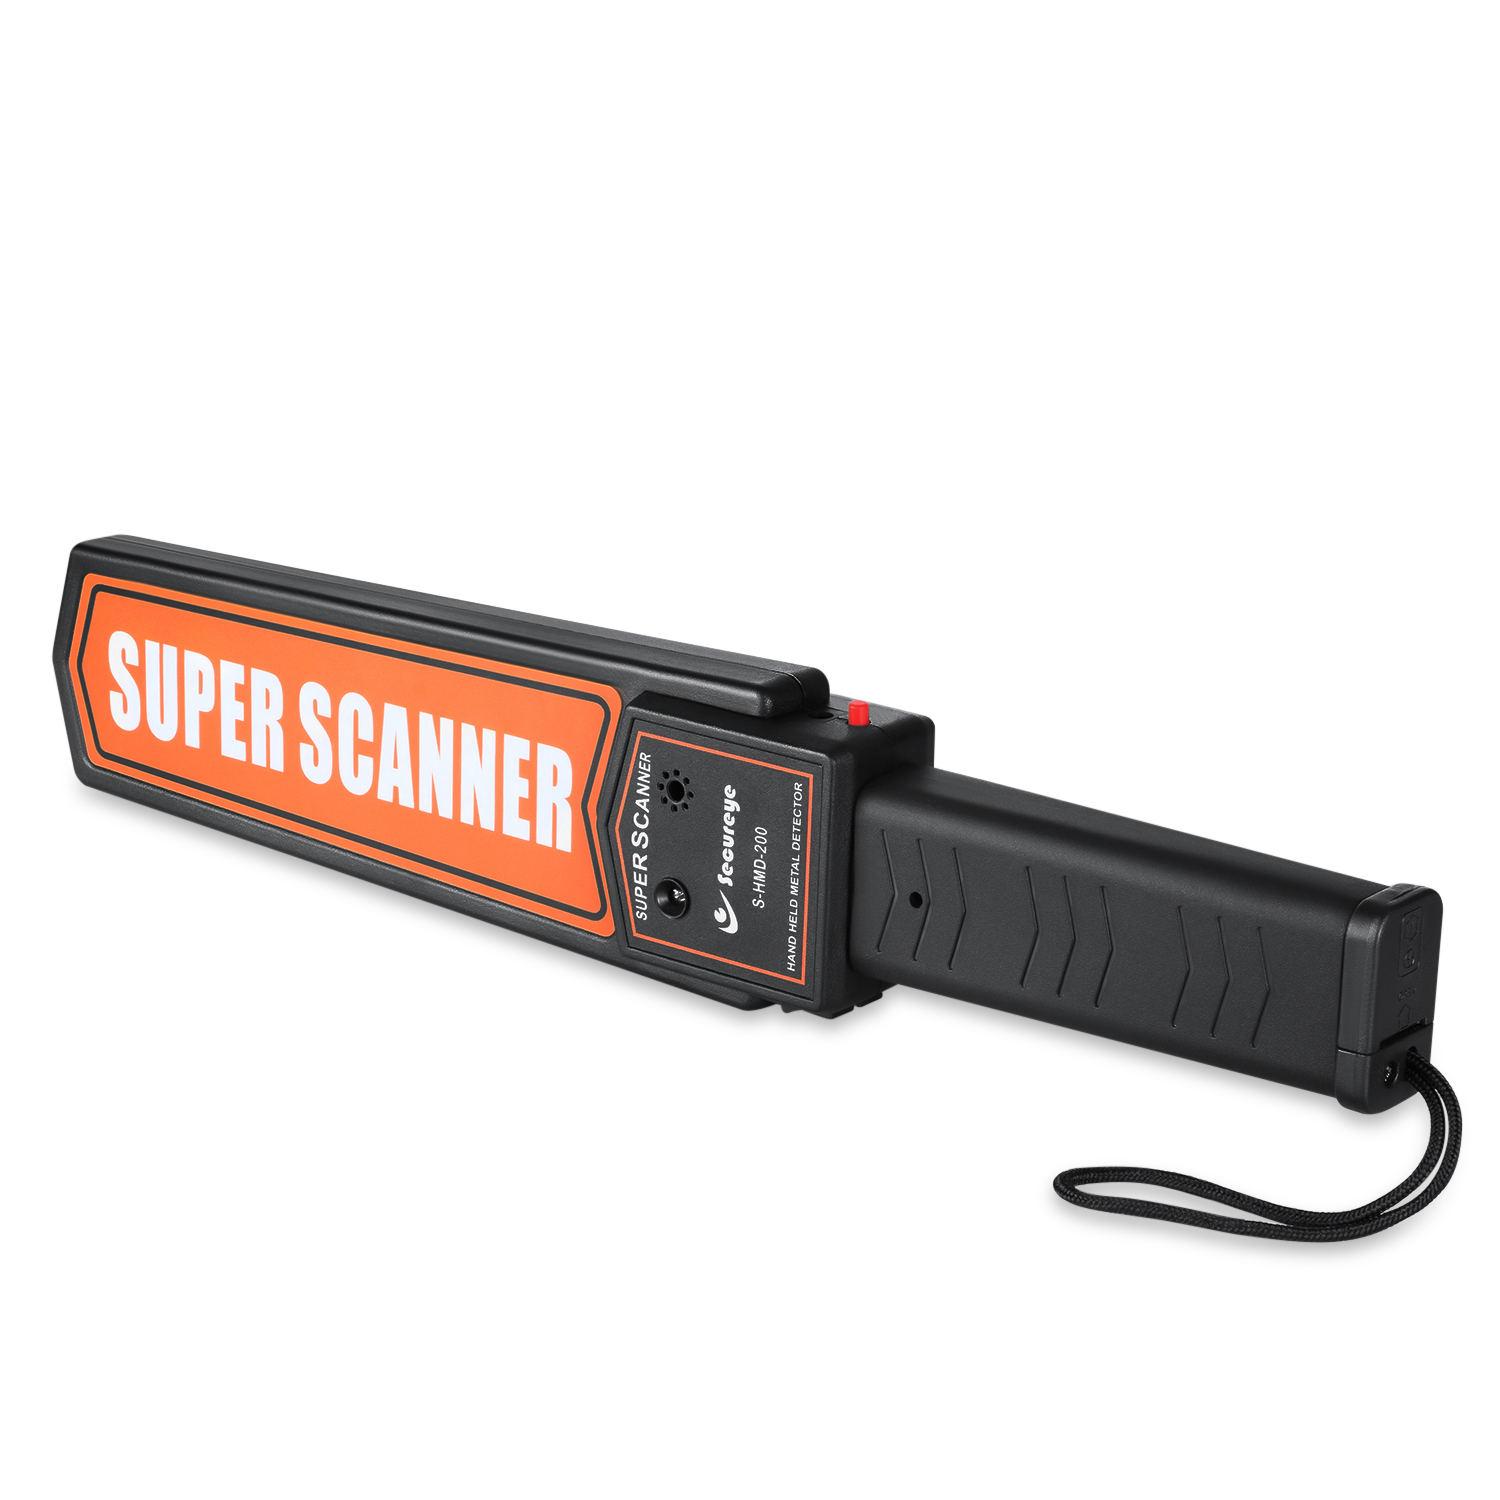 Hand Held Metal Detector for screening at the checkpoints of Many Places Like Metro Stations, Airports, other